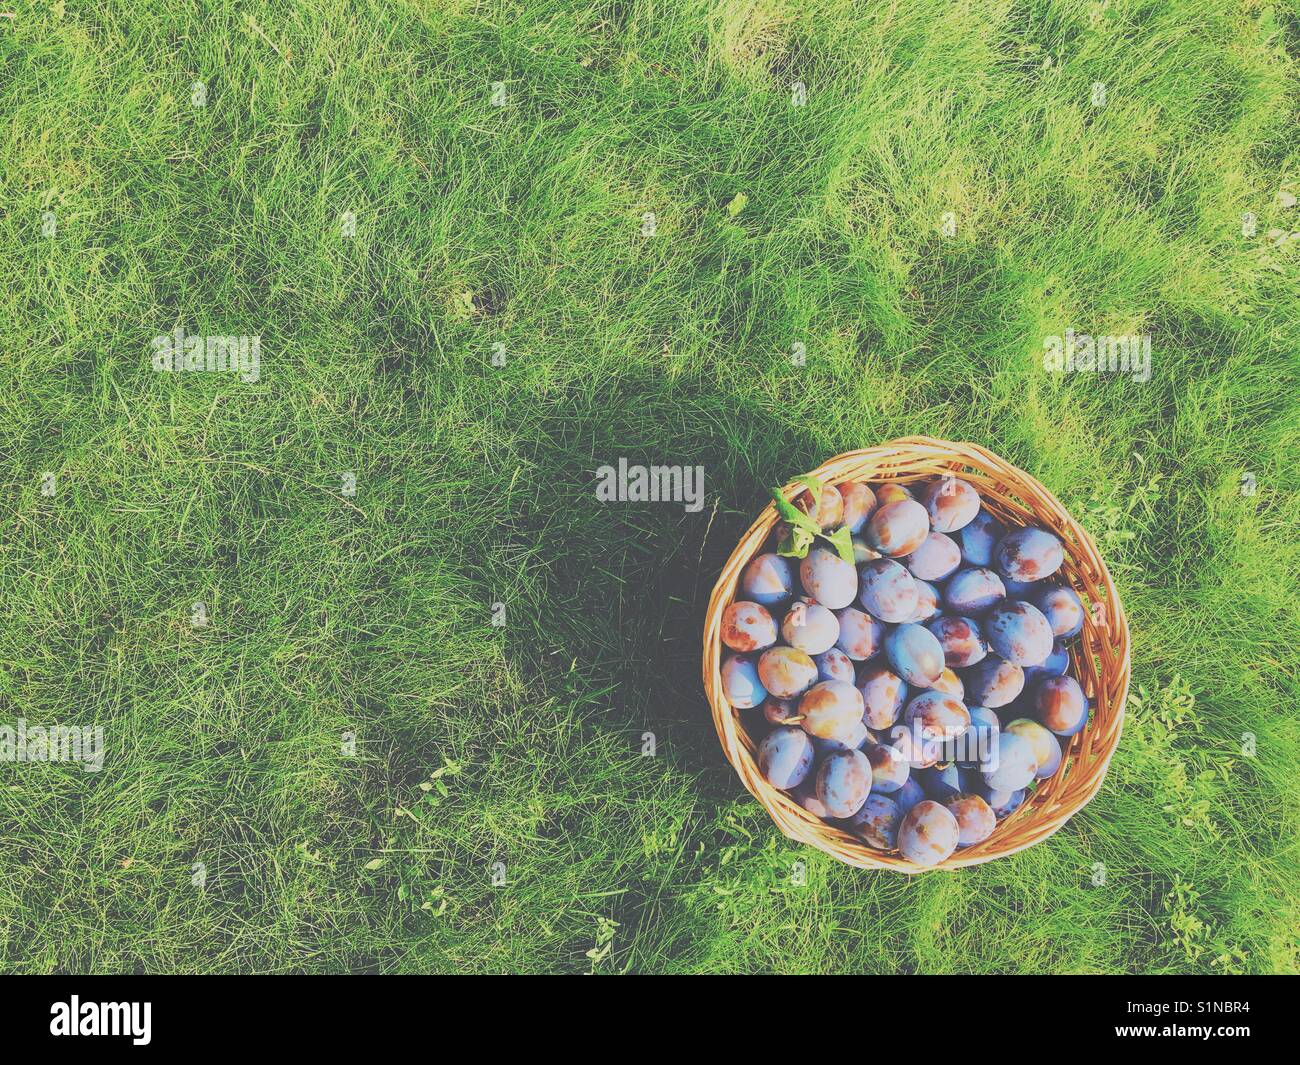 Freshly picked basket of prune plums sitting on green grass. Faded edit. Space for copy. Stock Photo